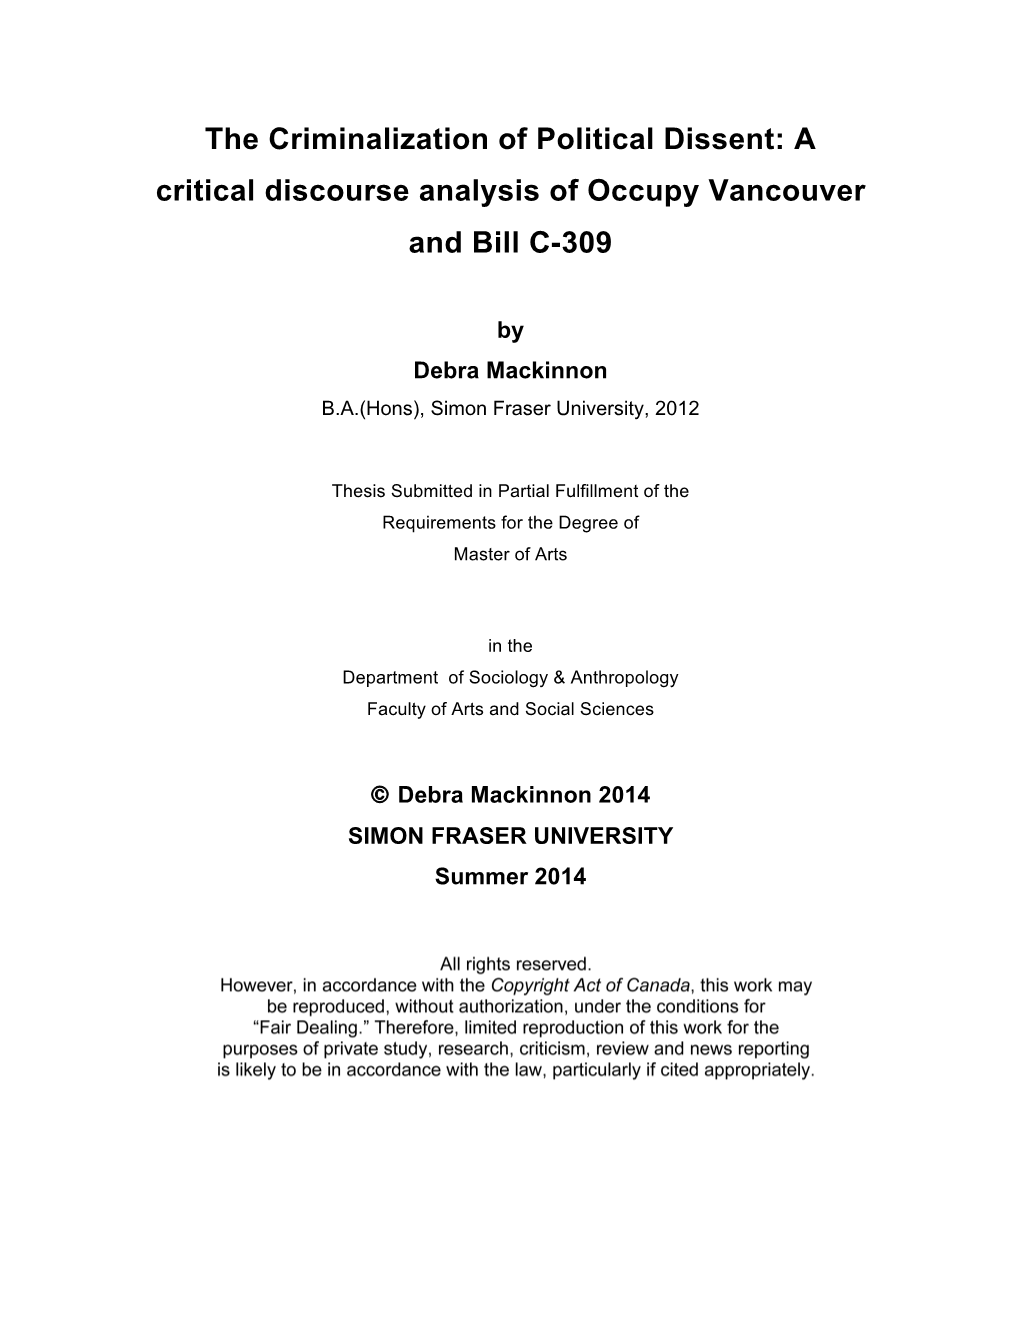 A Critical Discourse Analysis of Occupy Vancouver and Bill C-309